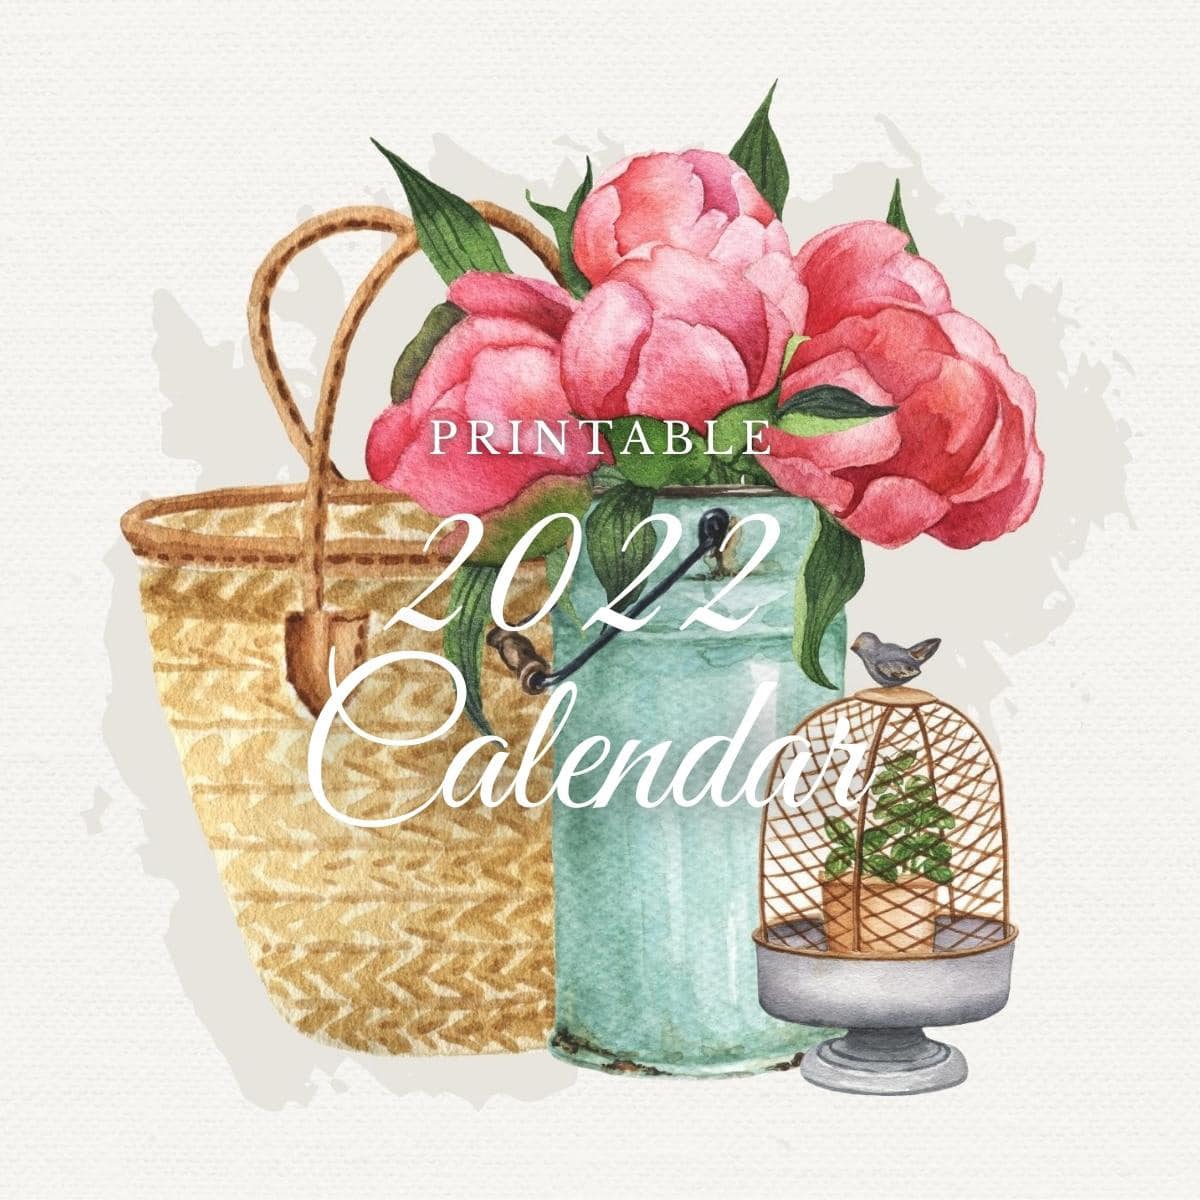 Free printable 2022 calendar featuring watercolor images in a vintage farmhouse style.